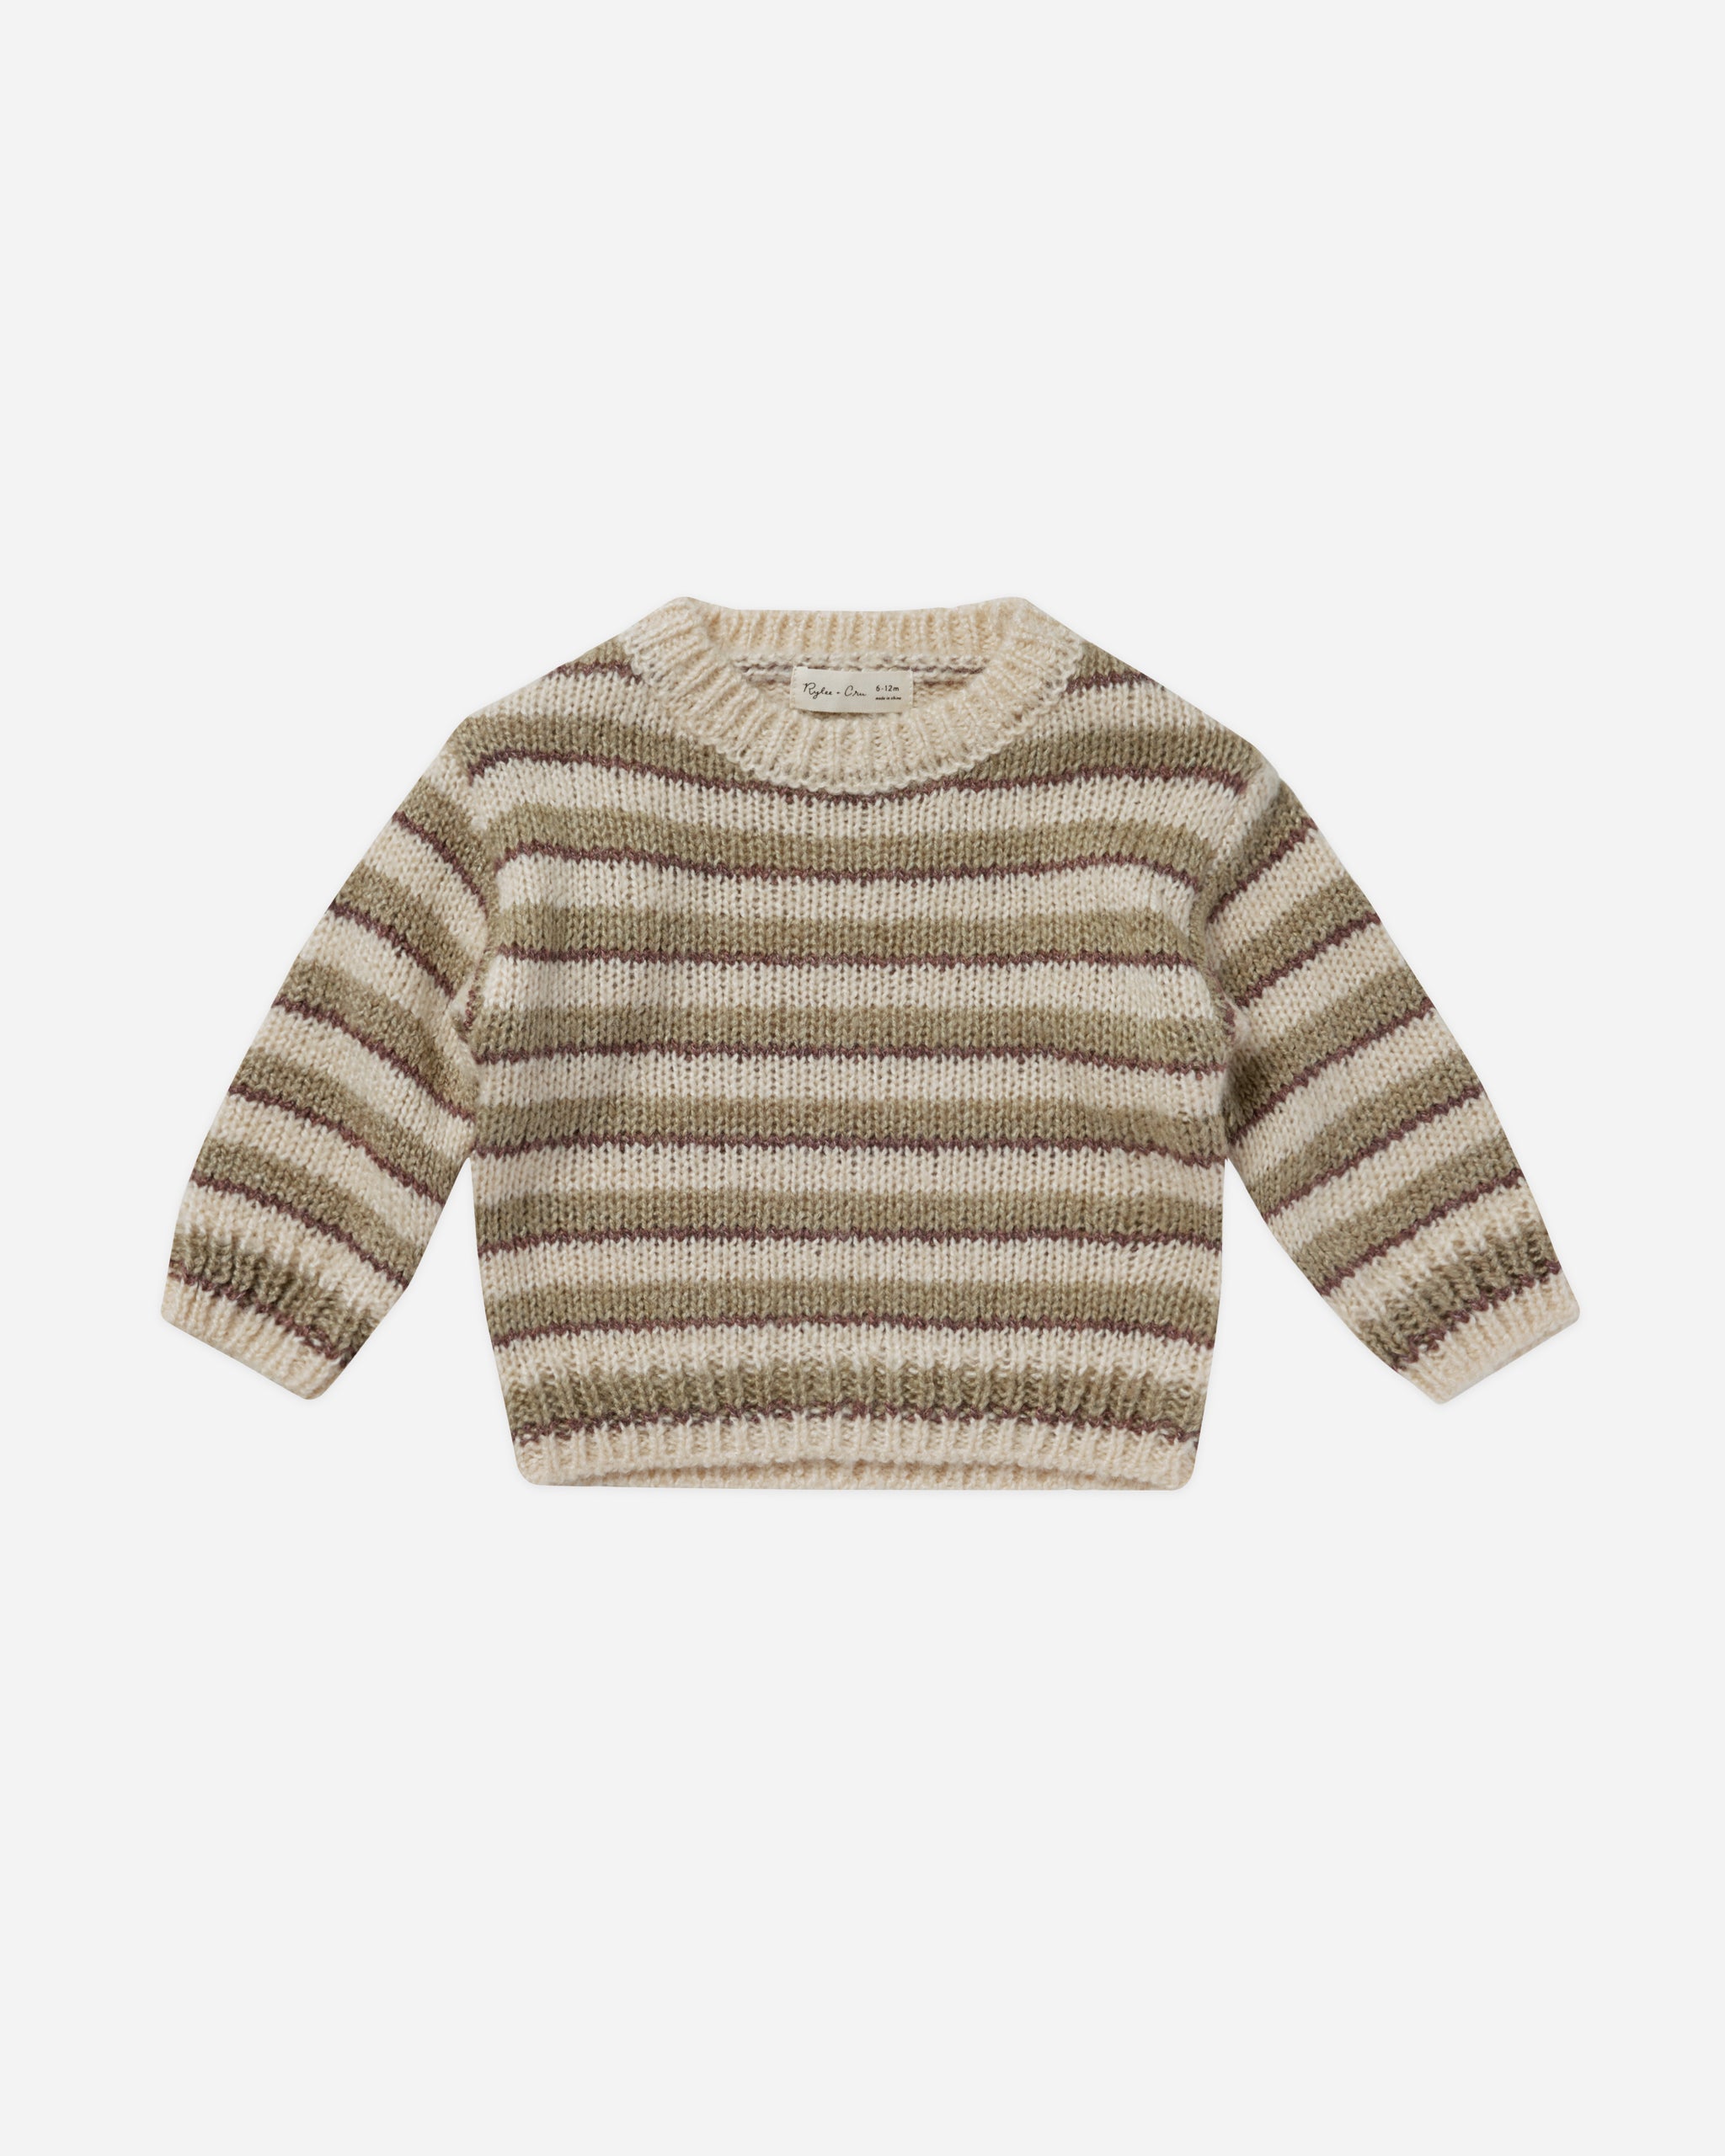 Aspen Sweater | Fall Stripe - Rylee + Cru | Kids Clothes | Trendy Baby Clothes | Modern Infant Outfits |